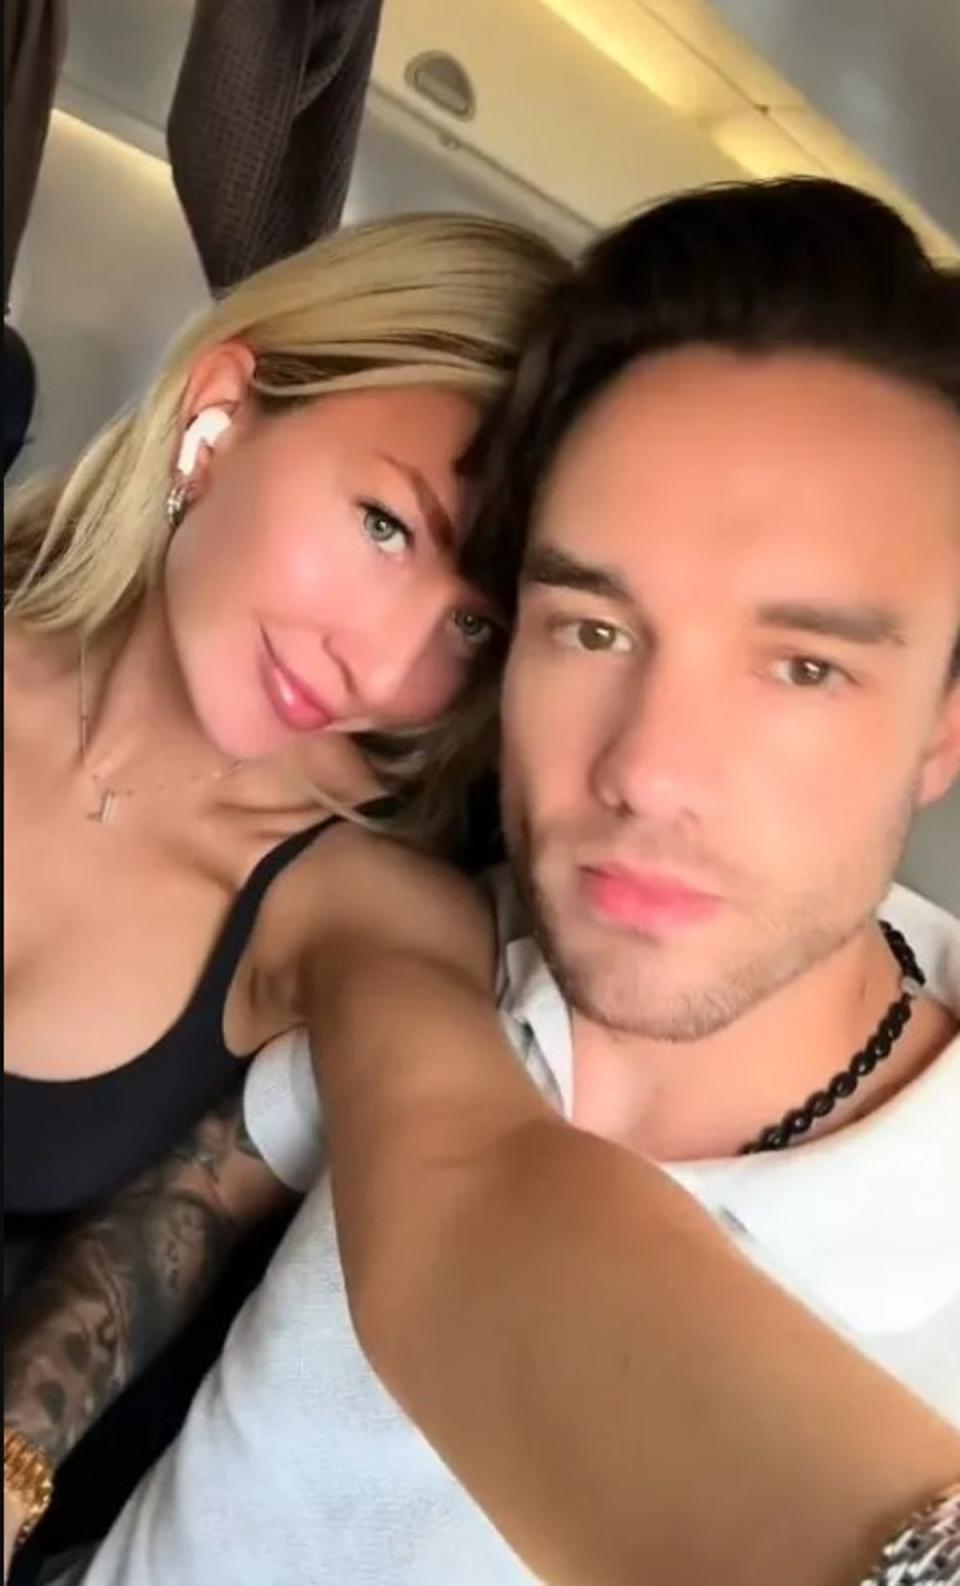 Liam Payne had been in Italy with Kate Cassidy celebrating their one-year anniversary (TikTok / Kateecass)